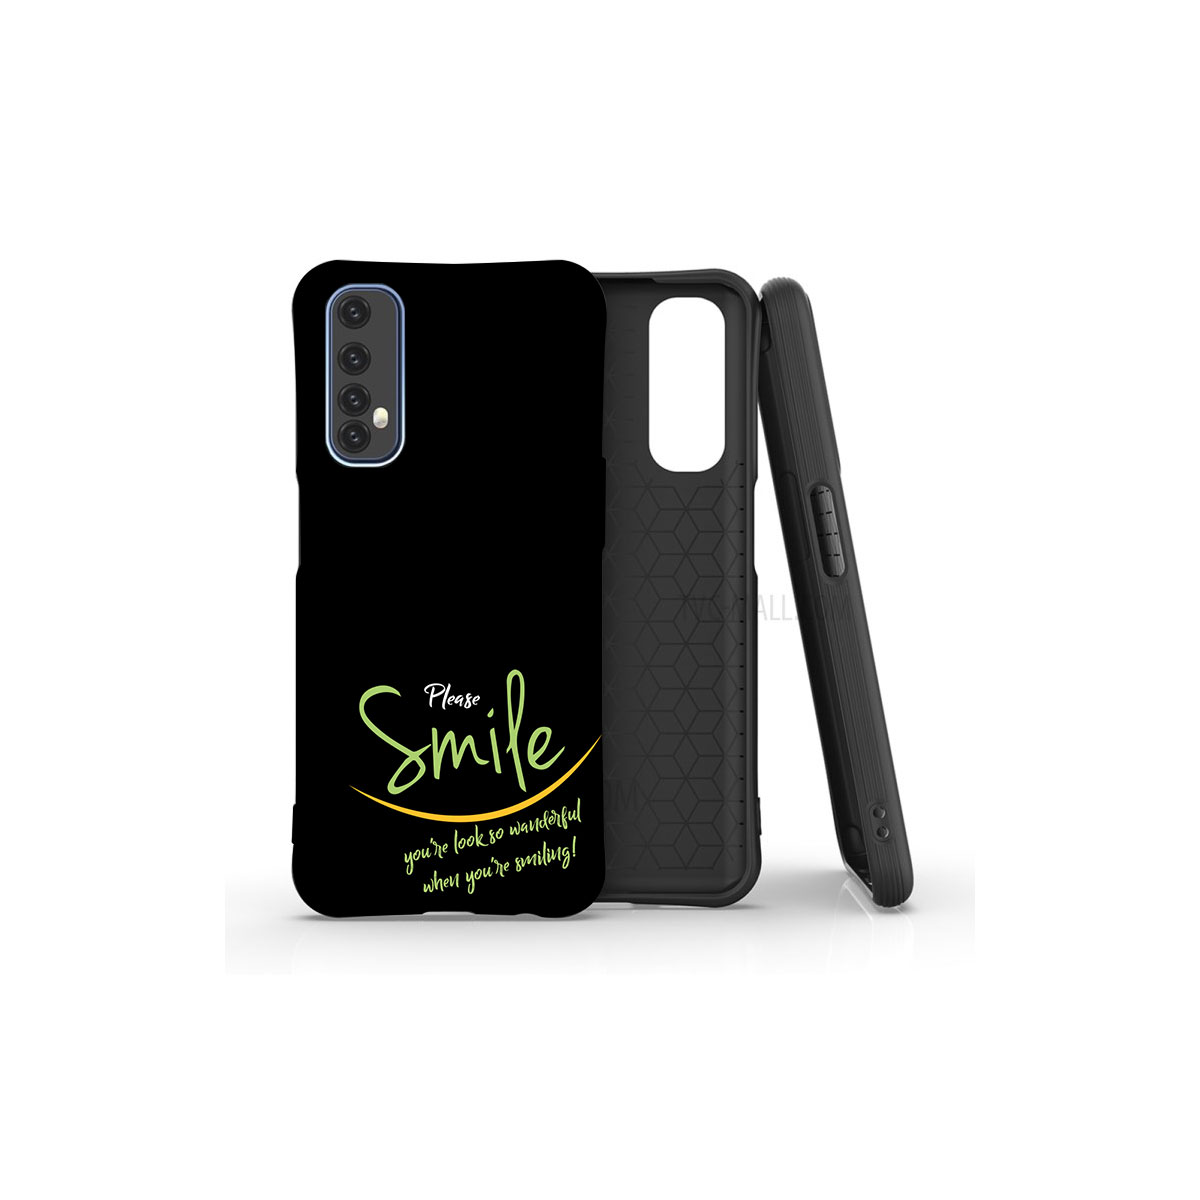 Personalized Printed Mobile Cover